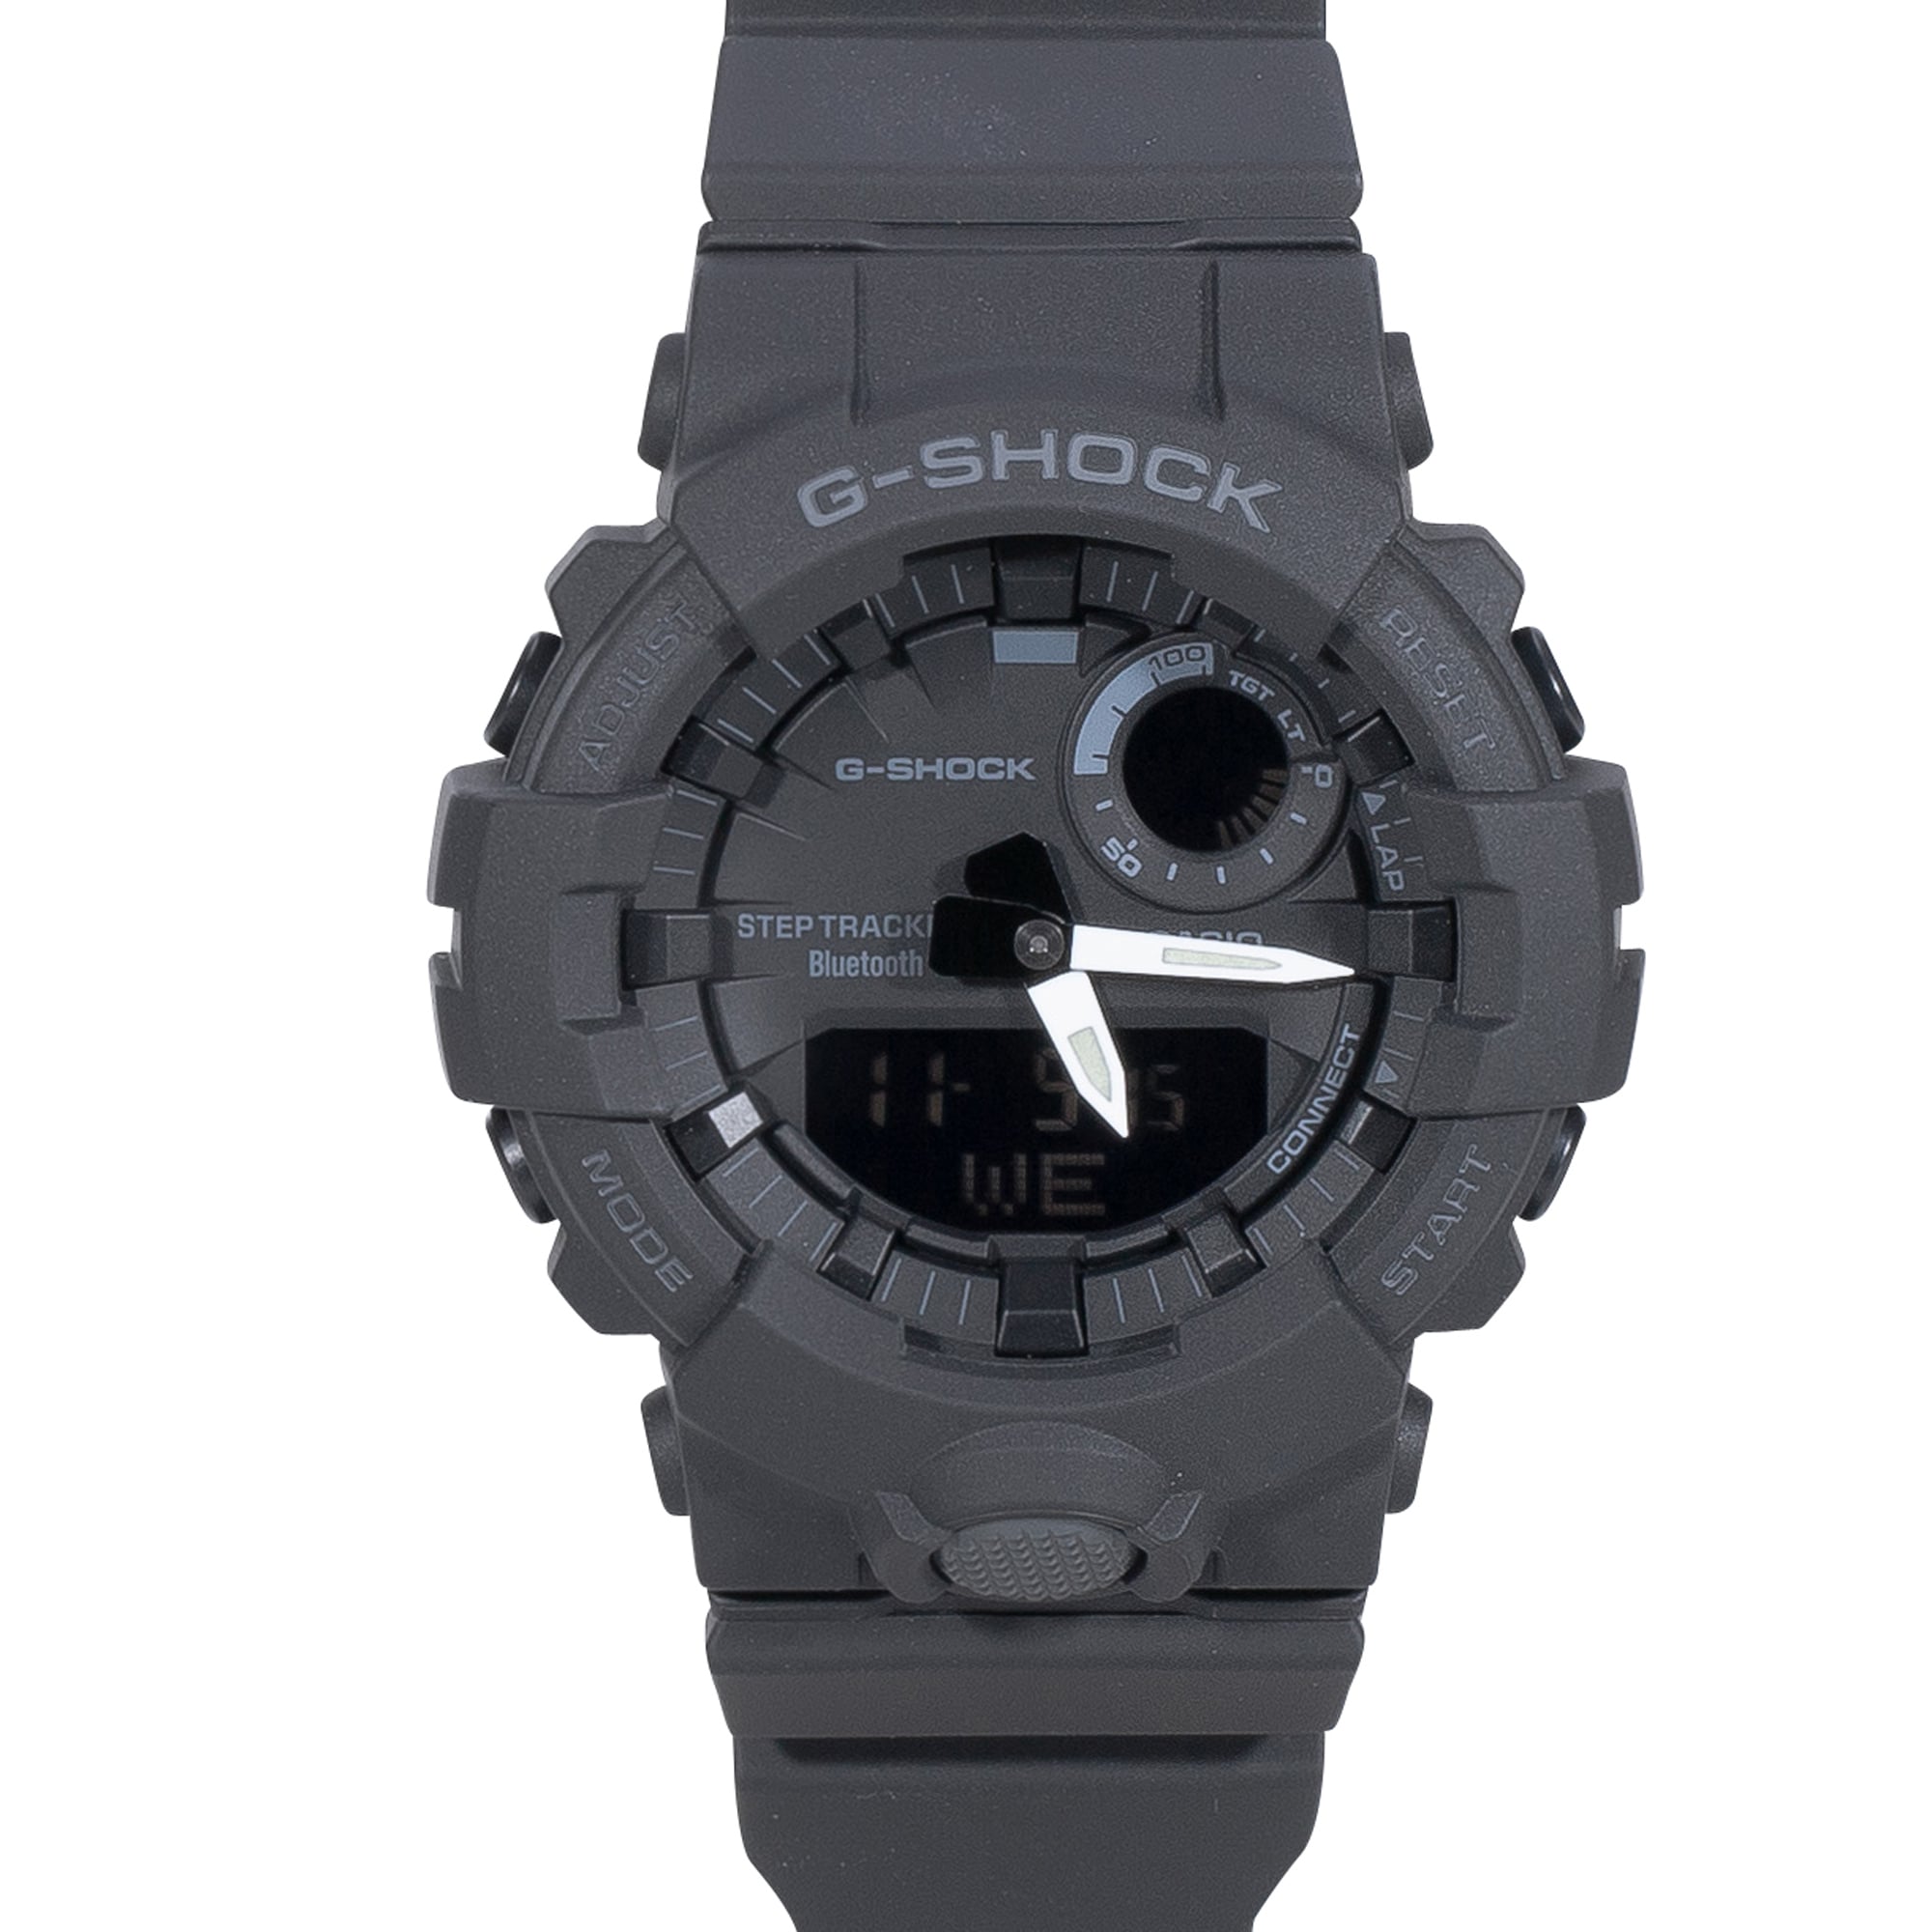 Purchase the Casio Watch G-Shock G-Squad GBA-800-1AER